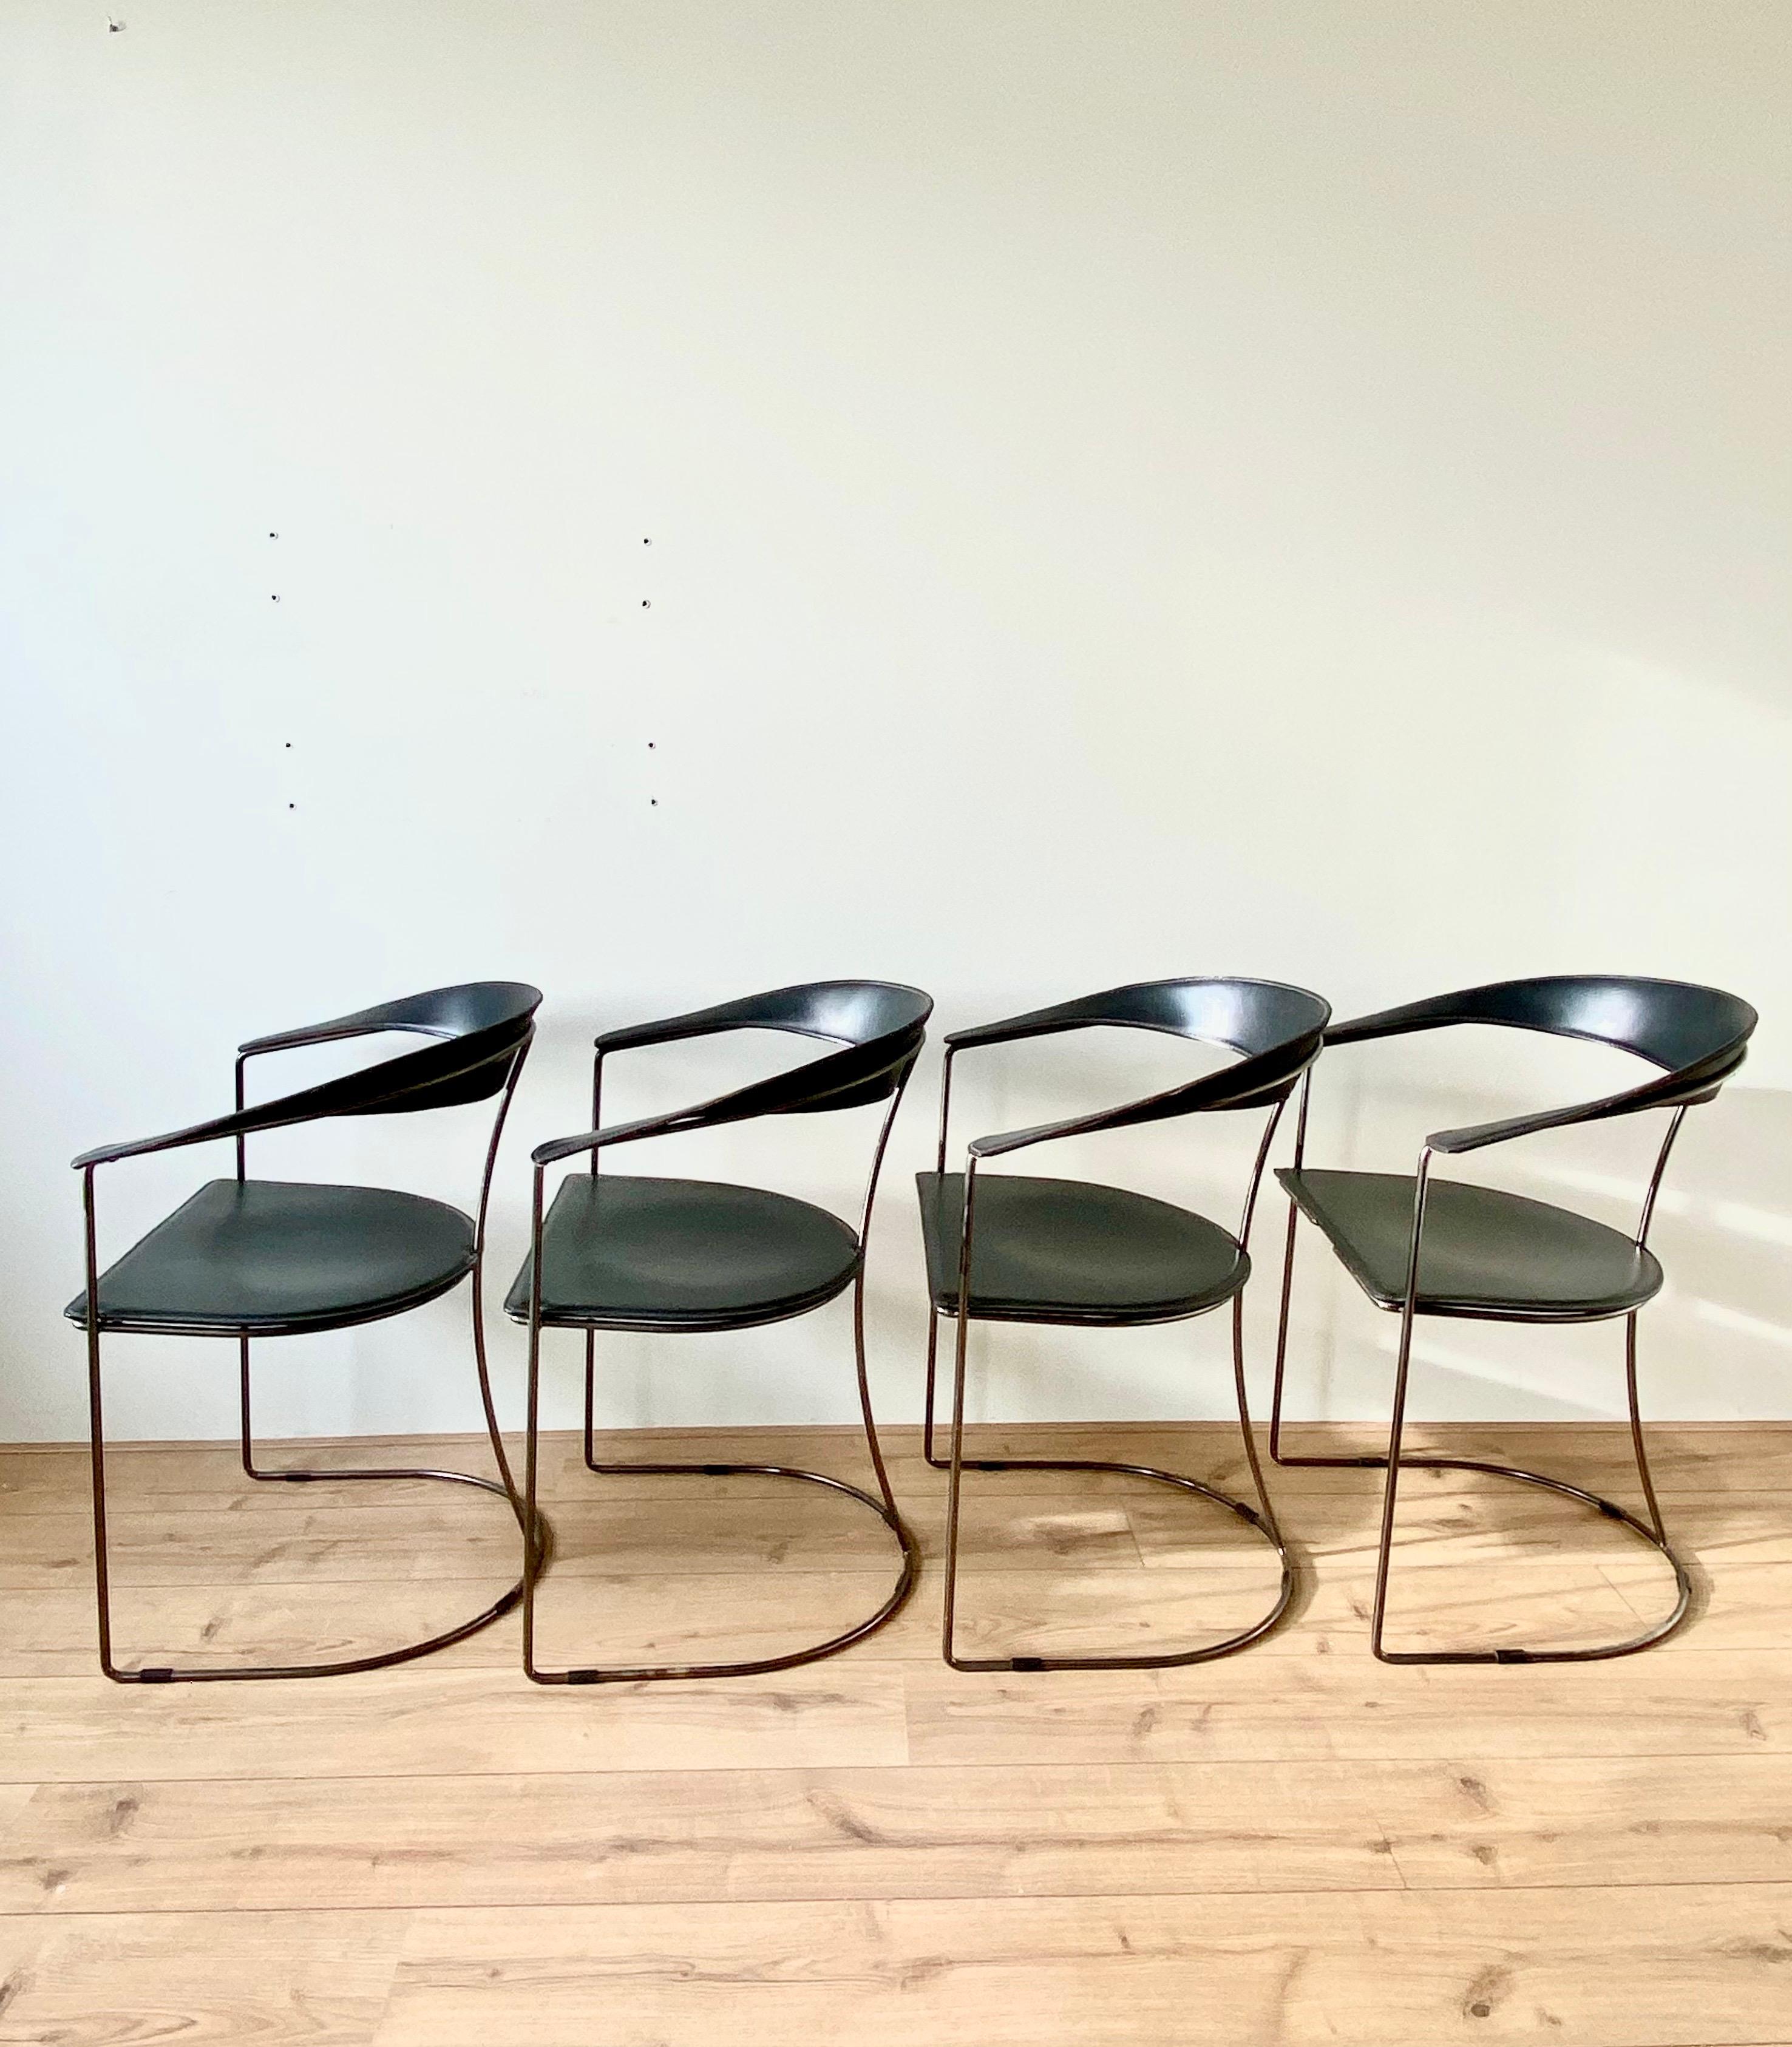 Minimalist Set of 6 Black Leather Italian Dining Room Chairs, by Arrben, 1980s FINAL SALE